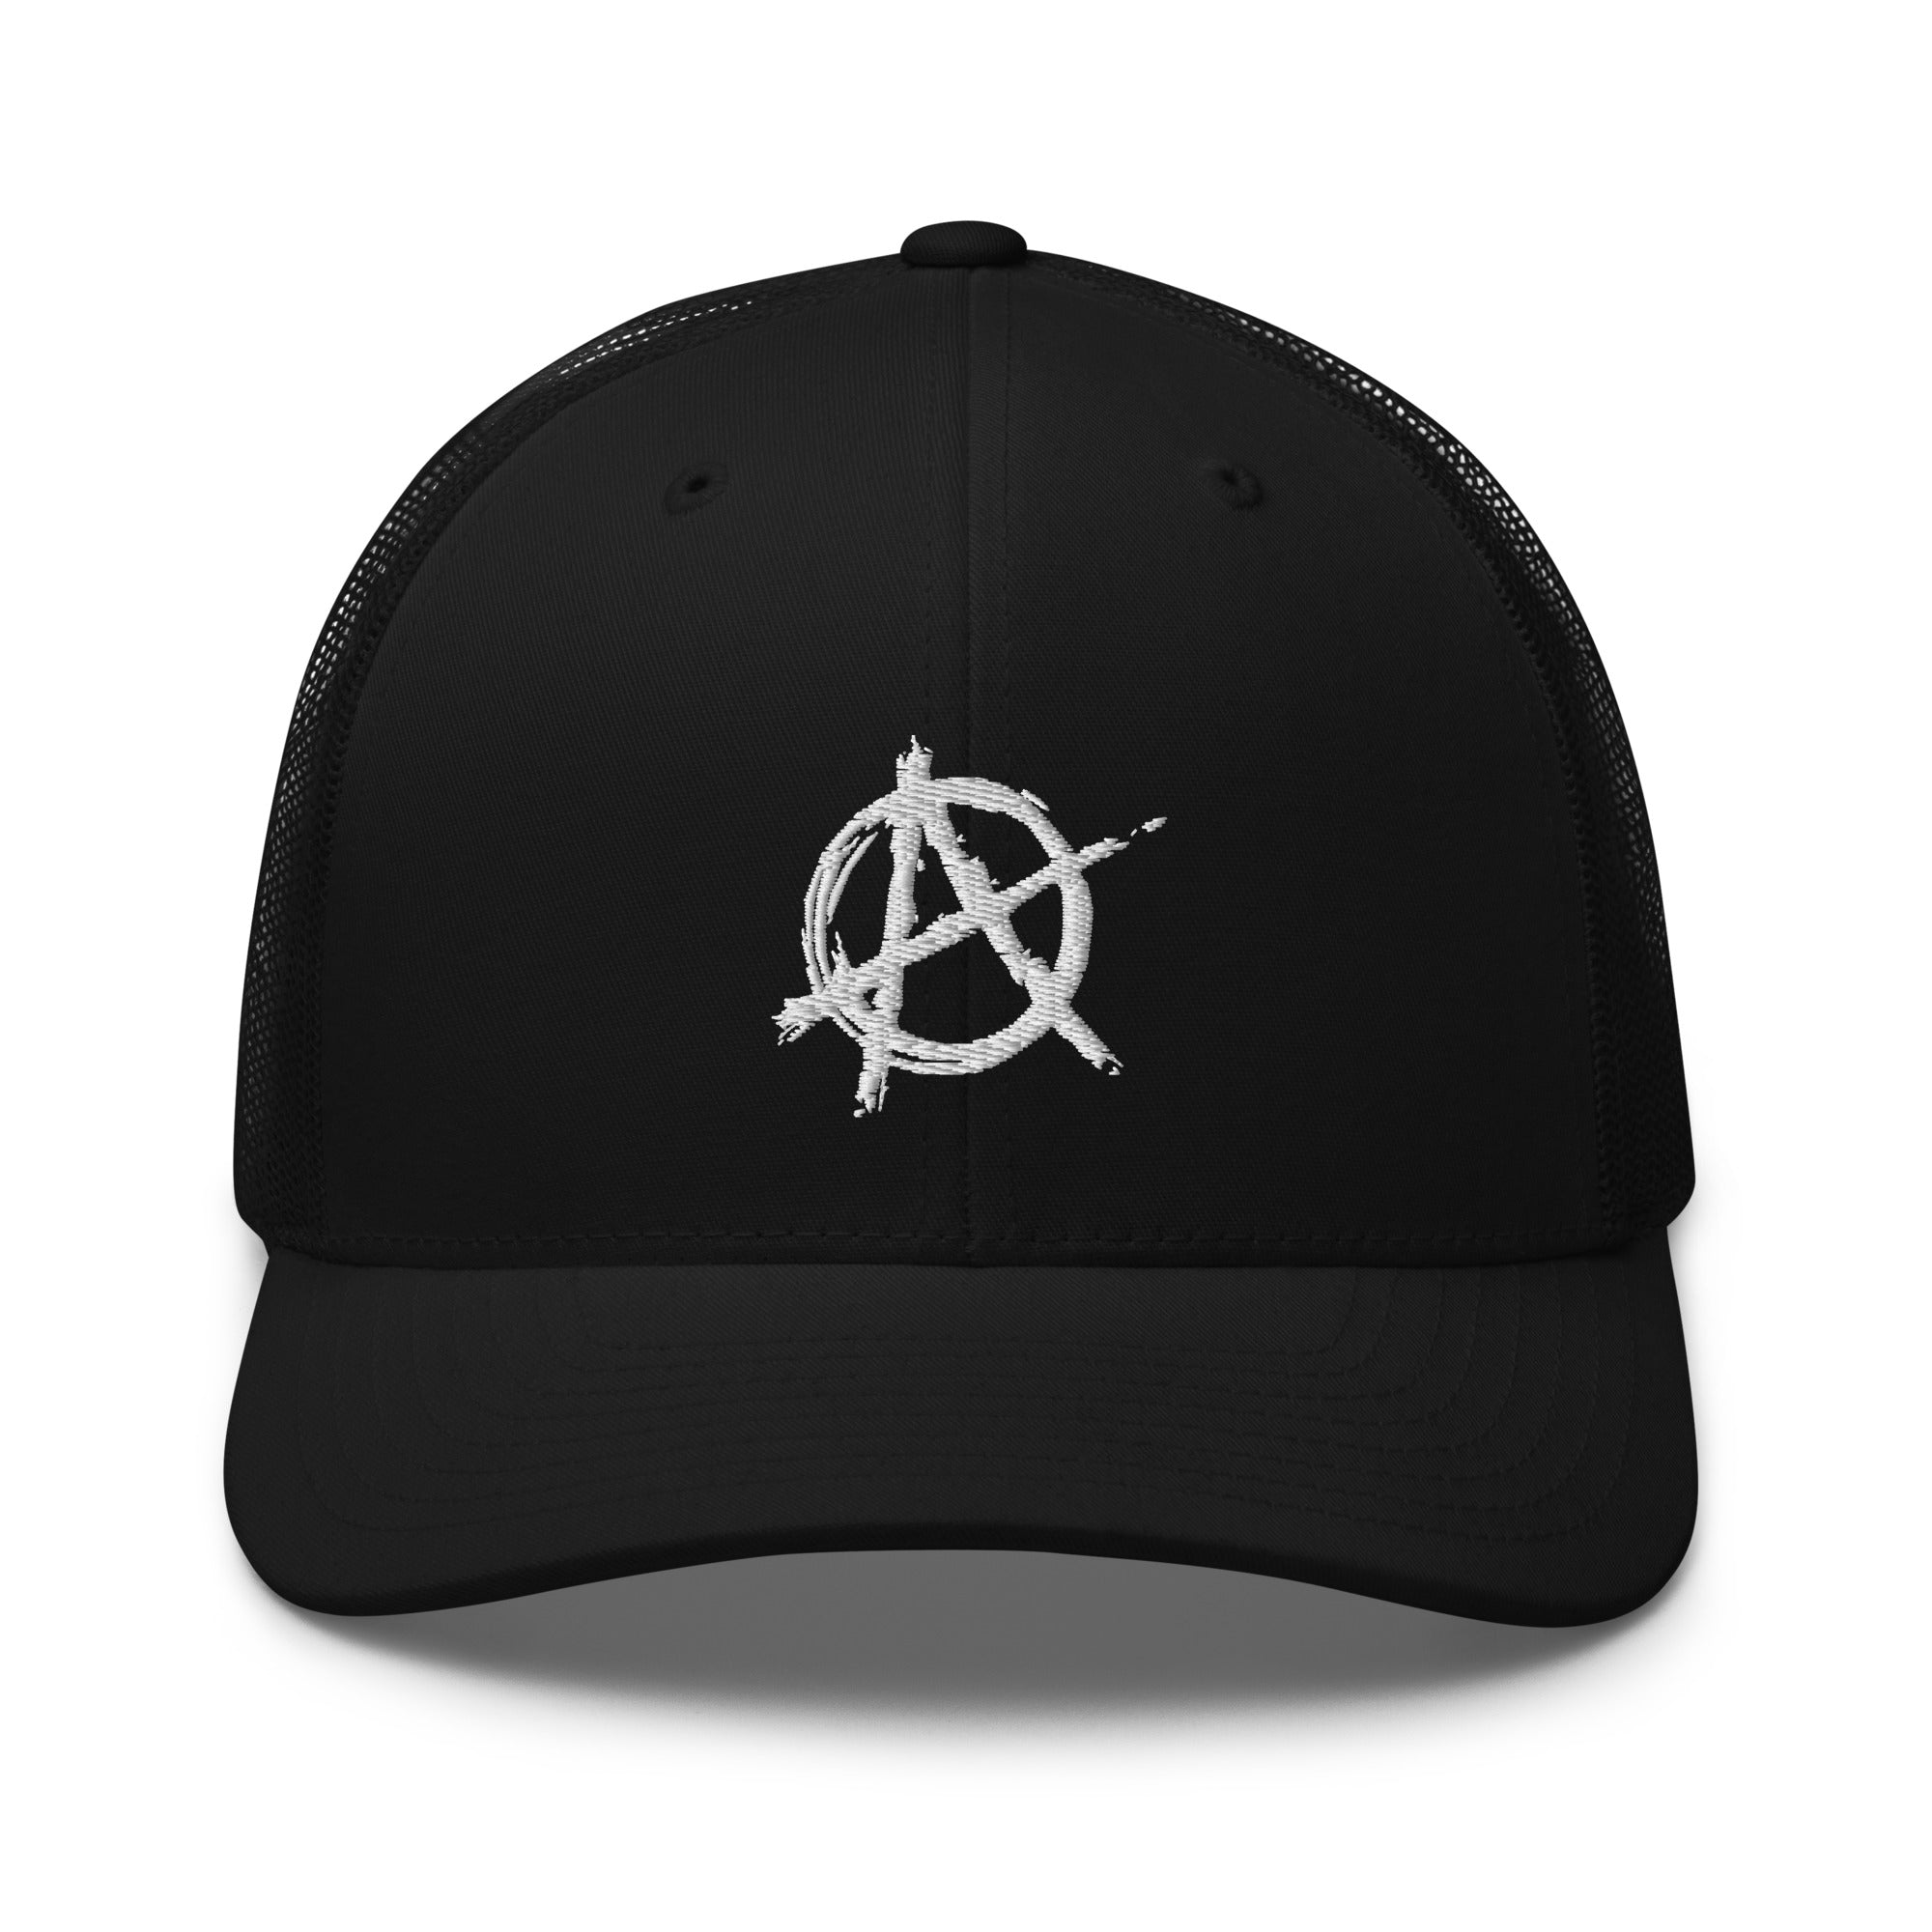 White Anarchy Sign Punk Rock Chaos Embroidered Retro Trucker Cap Snapback Hat